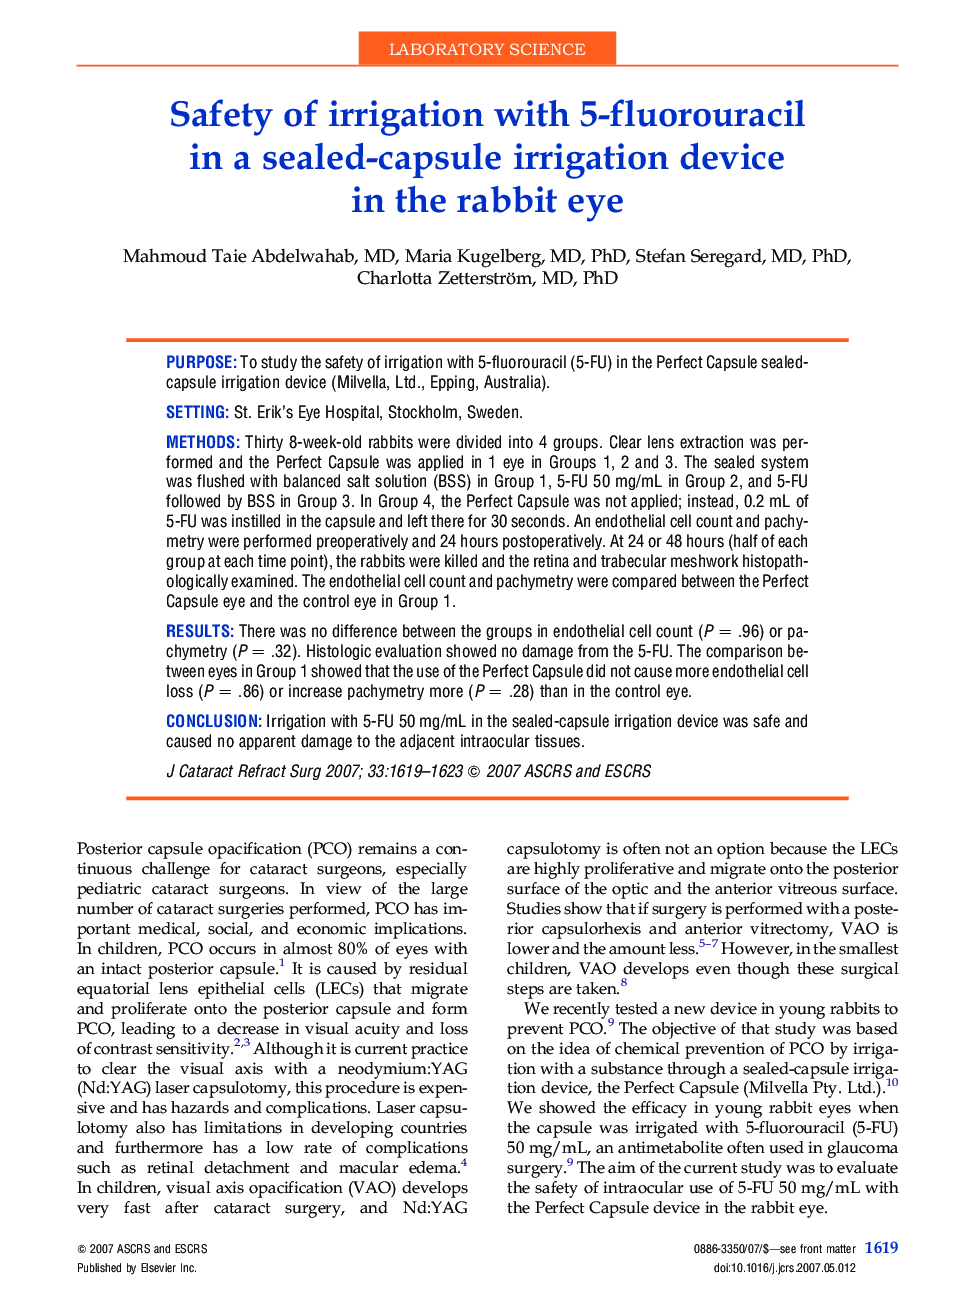 Safety of irrigation with 5-fluorouracil in a sealed-capsule irrigation device in the rabbit eye